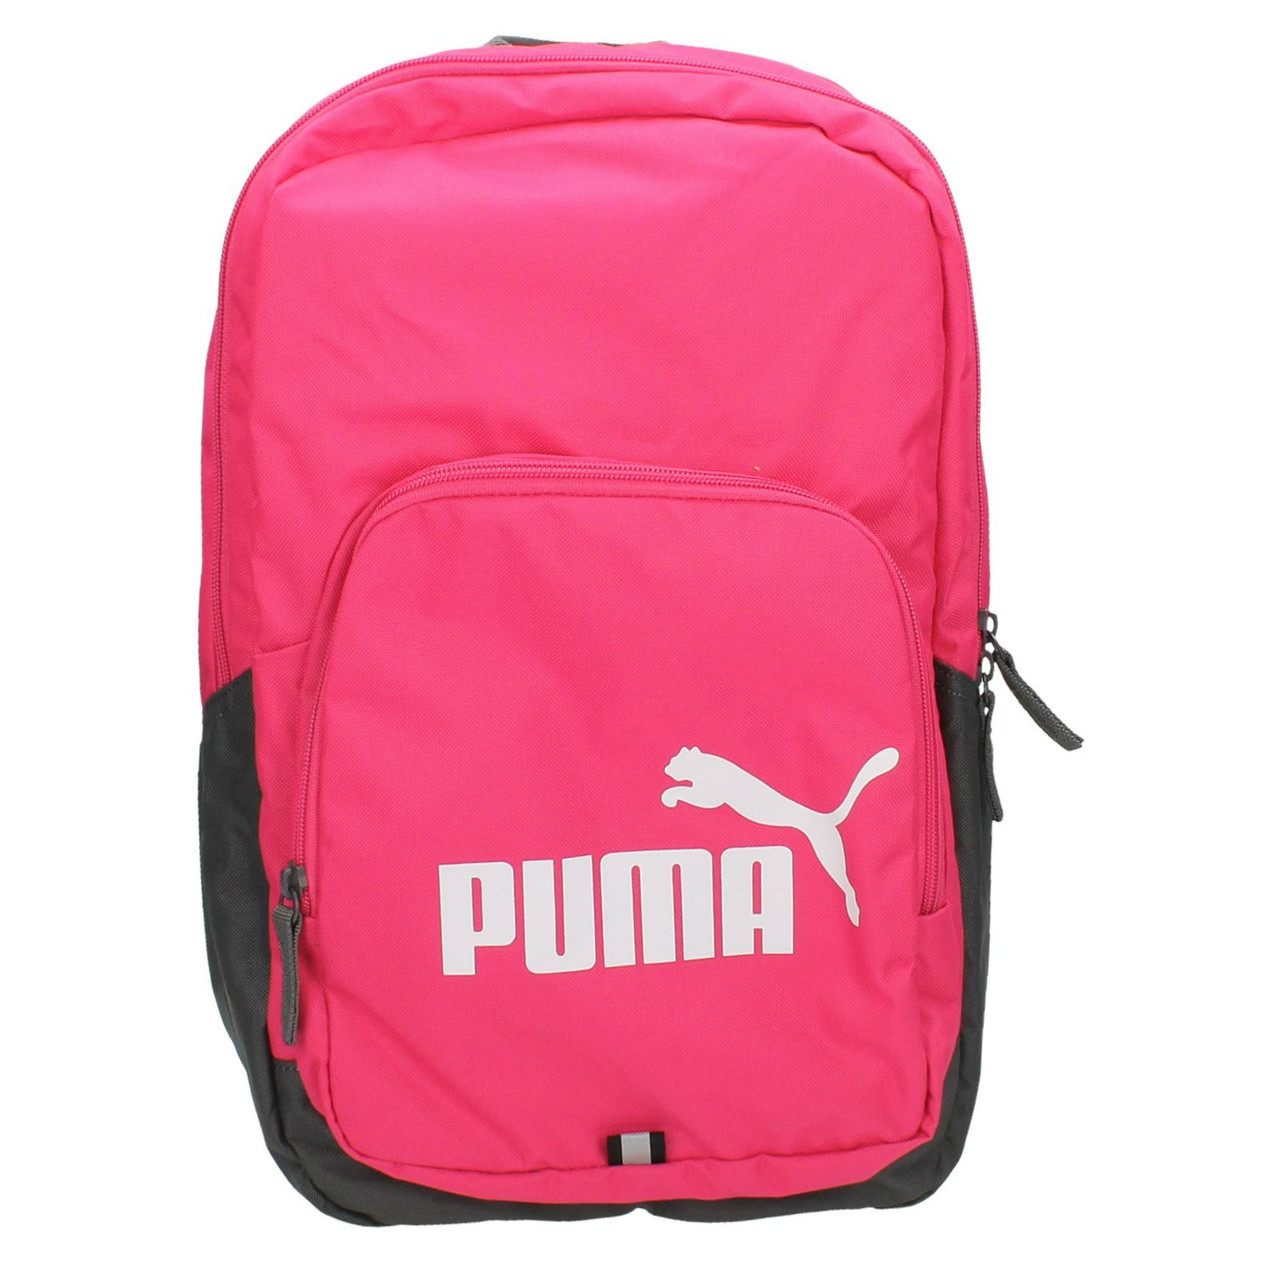 Puma Branded Backpack College Bag School Bags 25 Litres Red Graphic - Buy  Puma Branded Backpack College Bag School Bags 25 Litres Red Graphic Online  at Low Price - Snapdeal